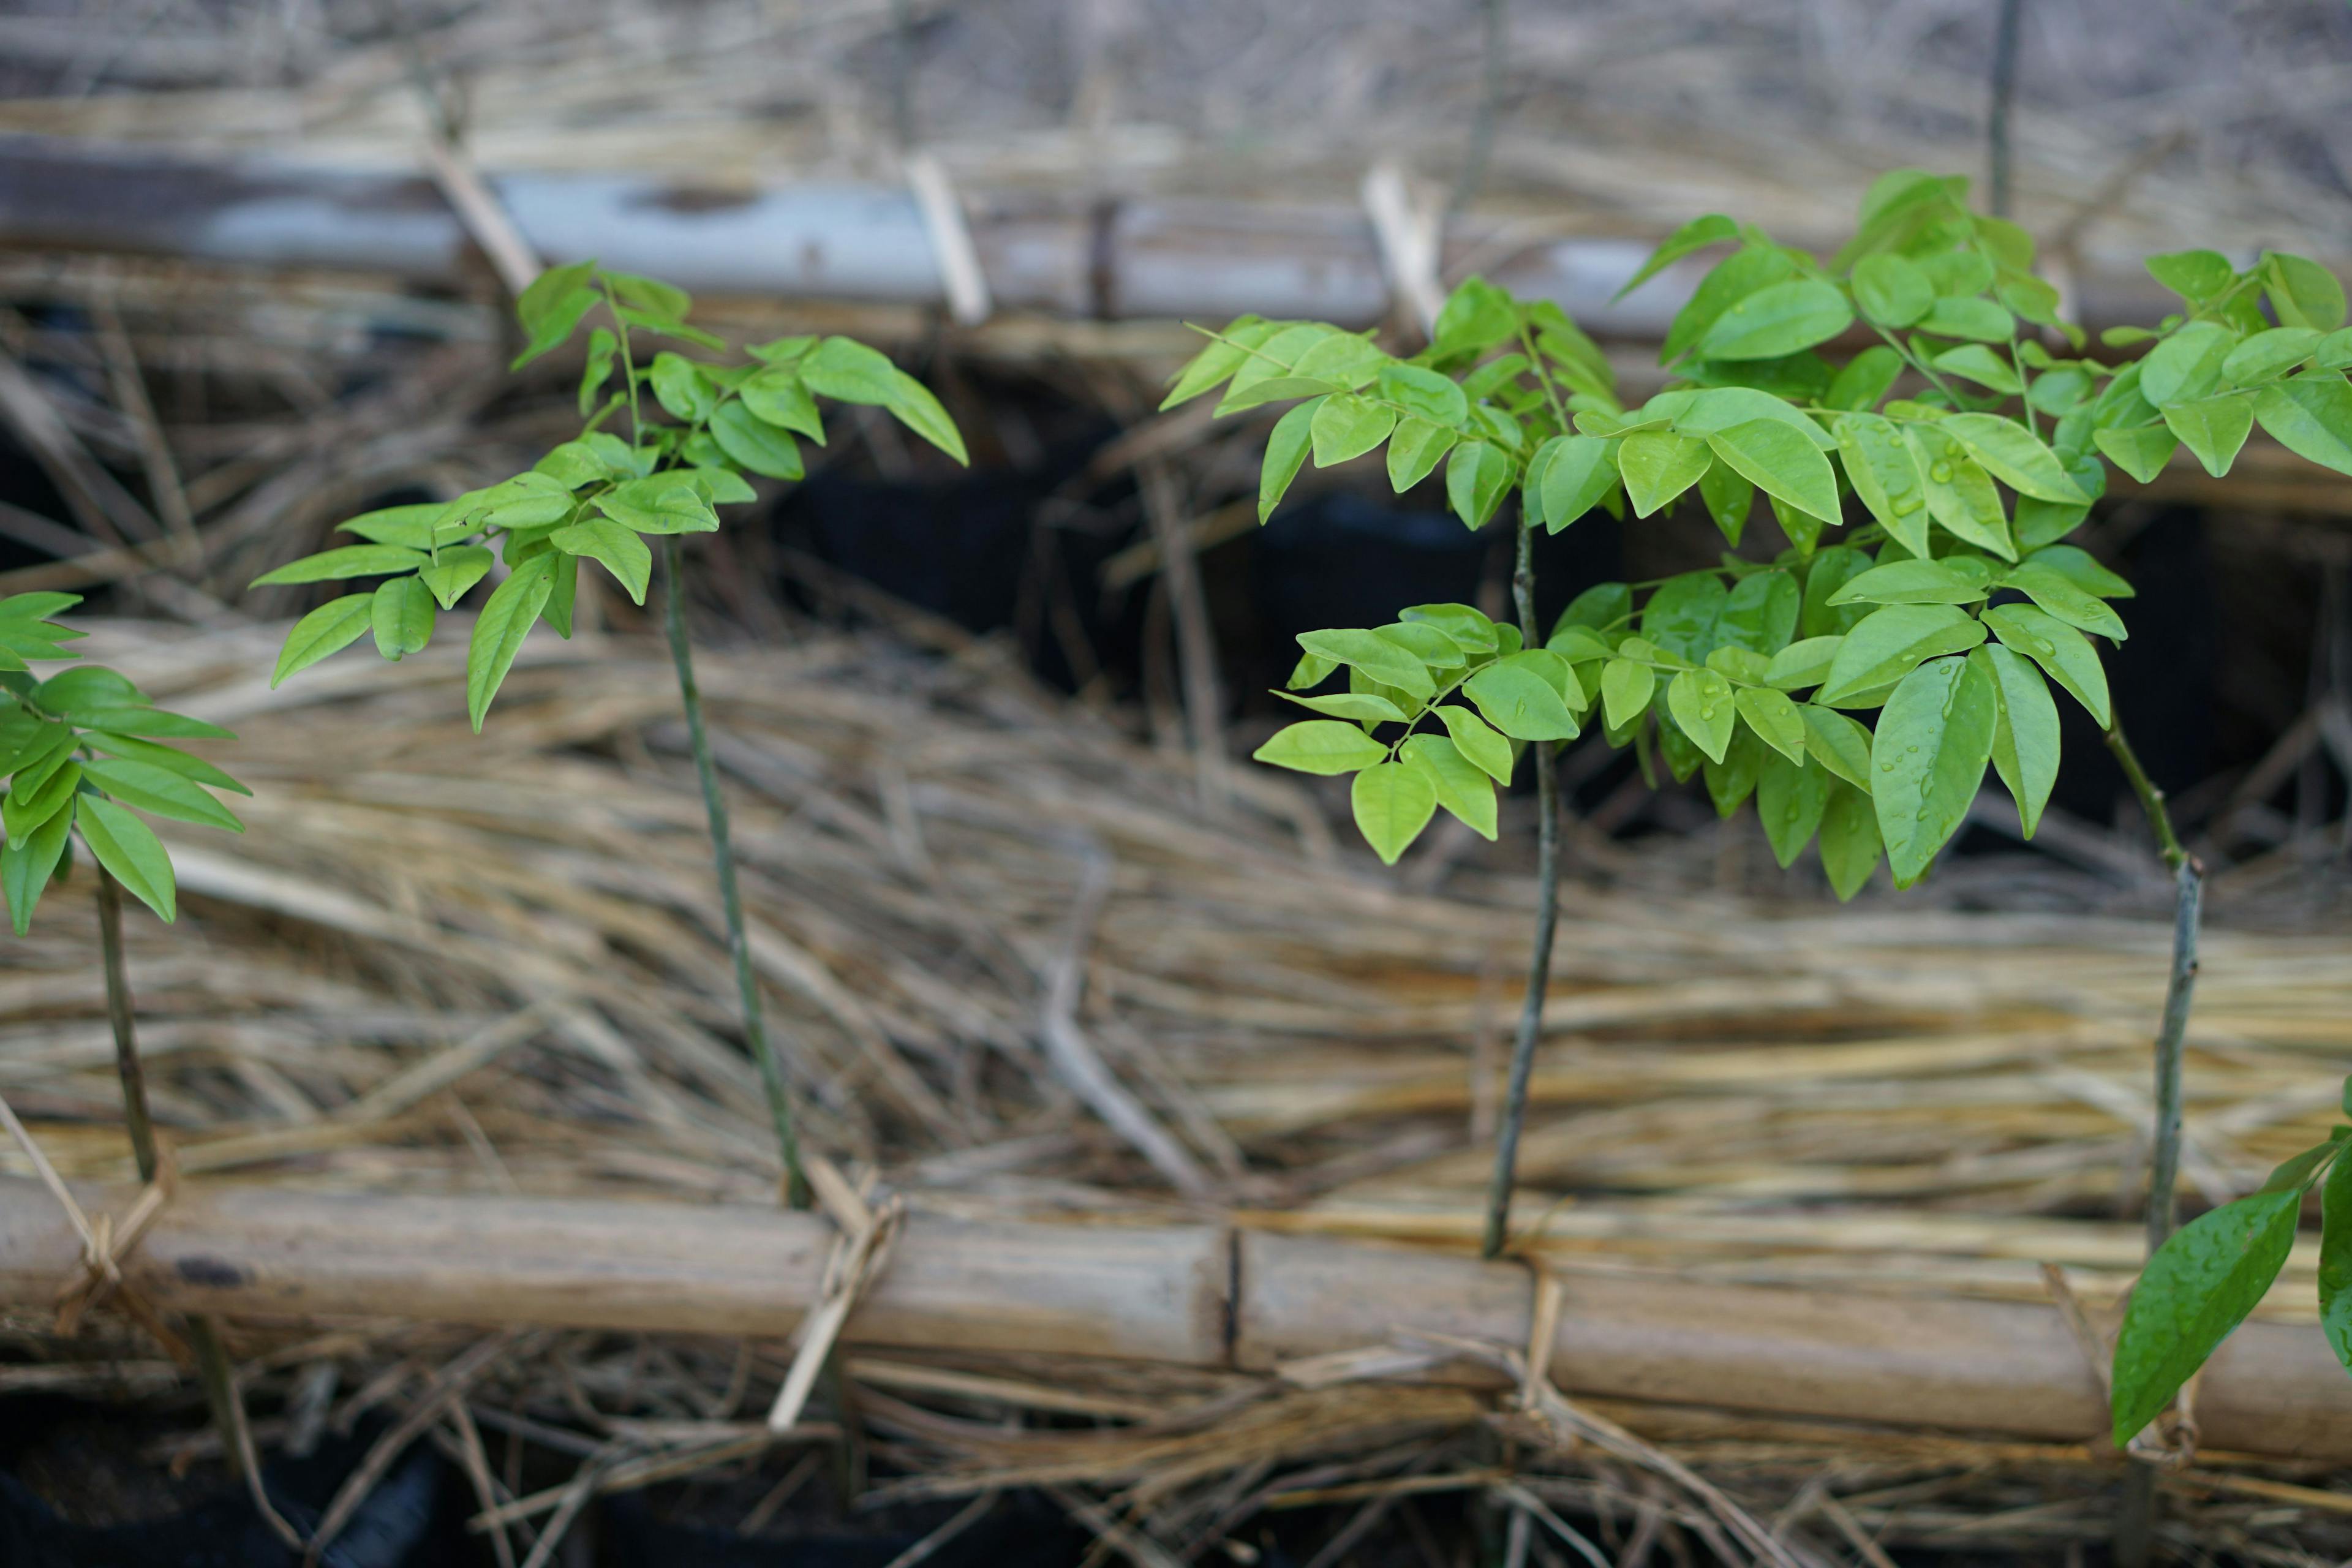 Young Dalbergia Odorifera or Payoong trees in Thailand in seedling plantation. Concept, economic plants. Grow forest. Agriculture, Forestation. | Image Credit: © Sanhanat - stock.adobe.com